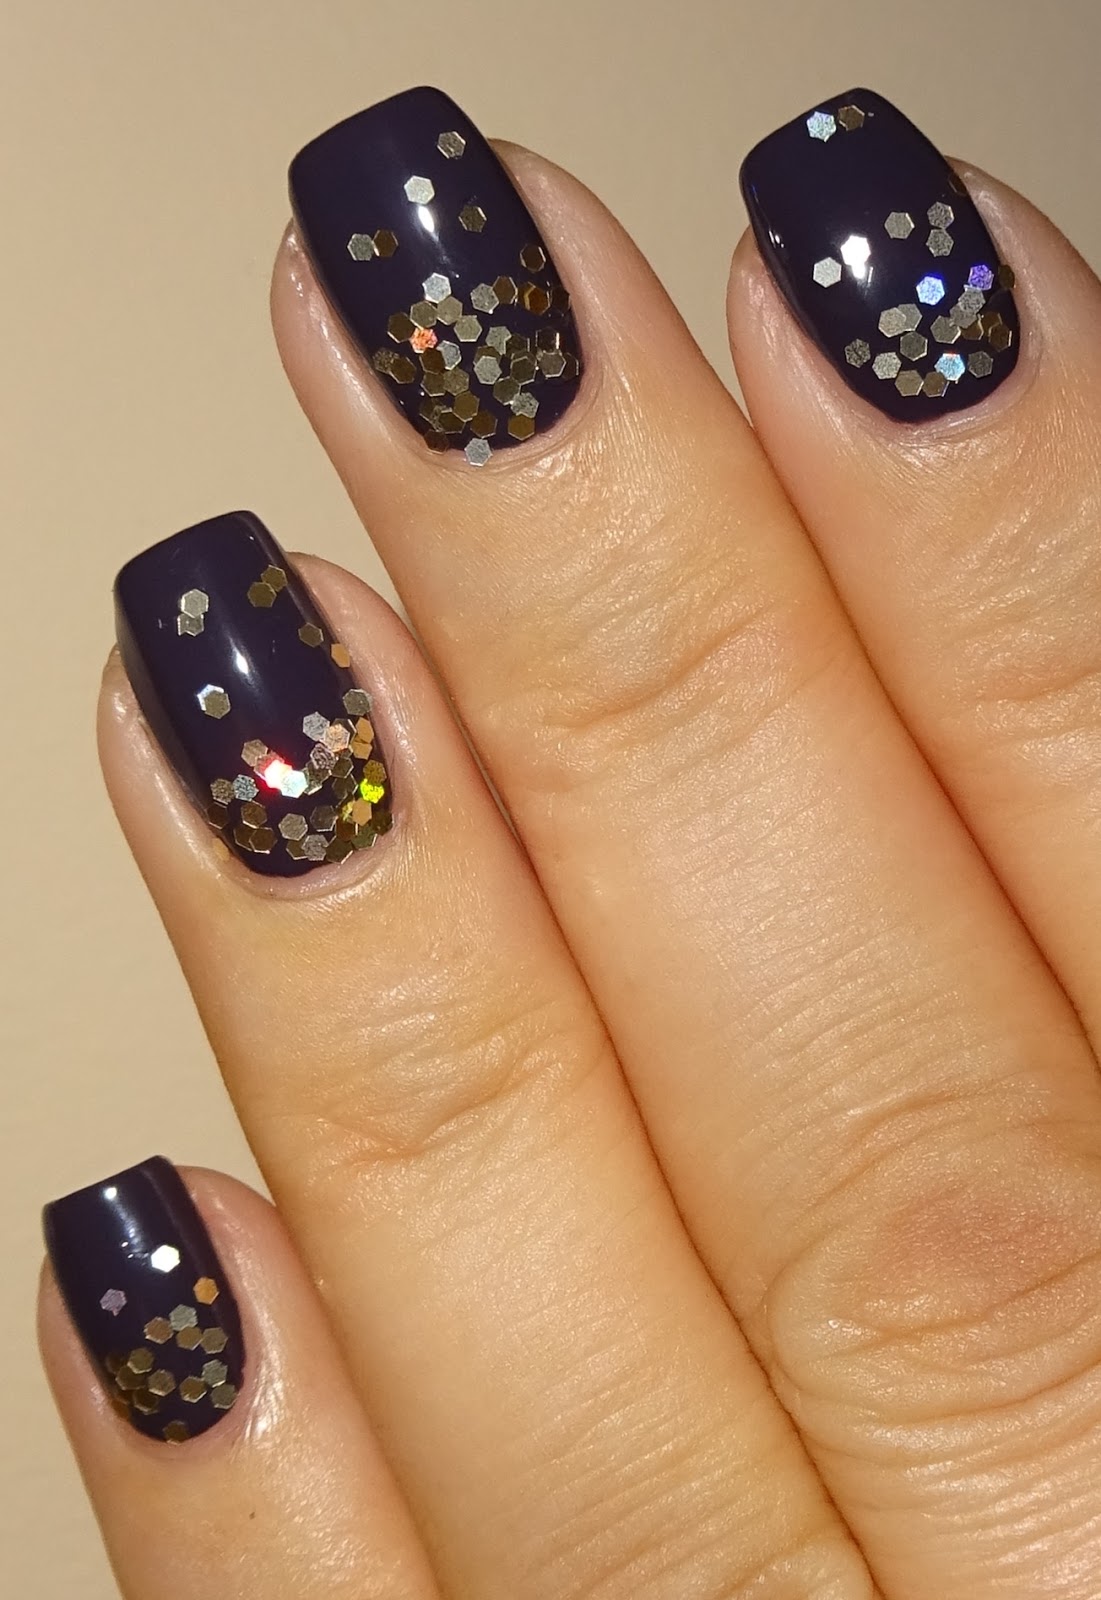 Wendy's Delights: Prosecco Holographic Chunky Nail Glitter from Sparkly  Nails